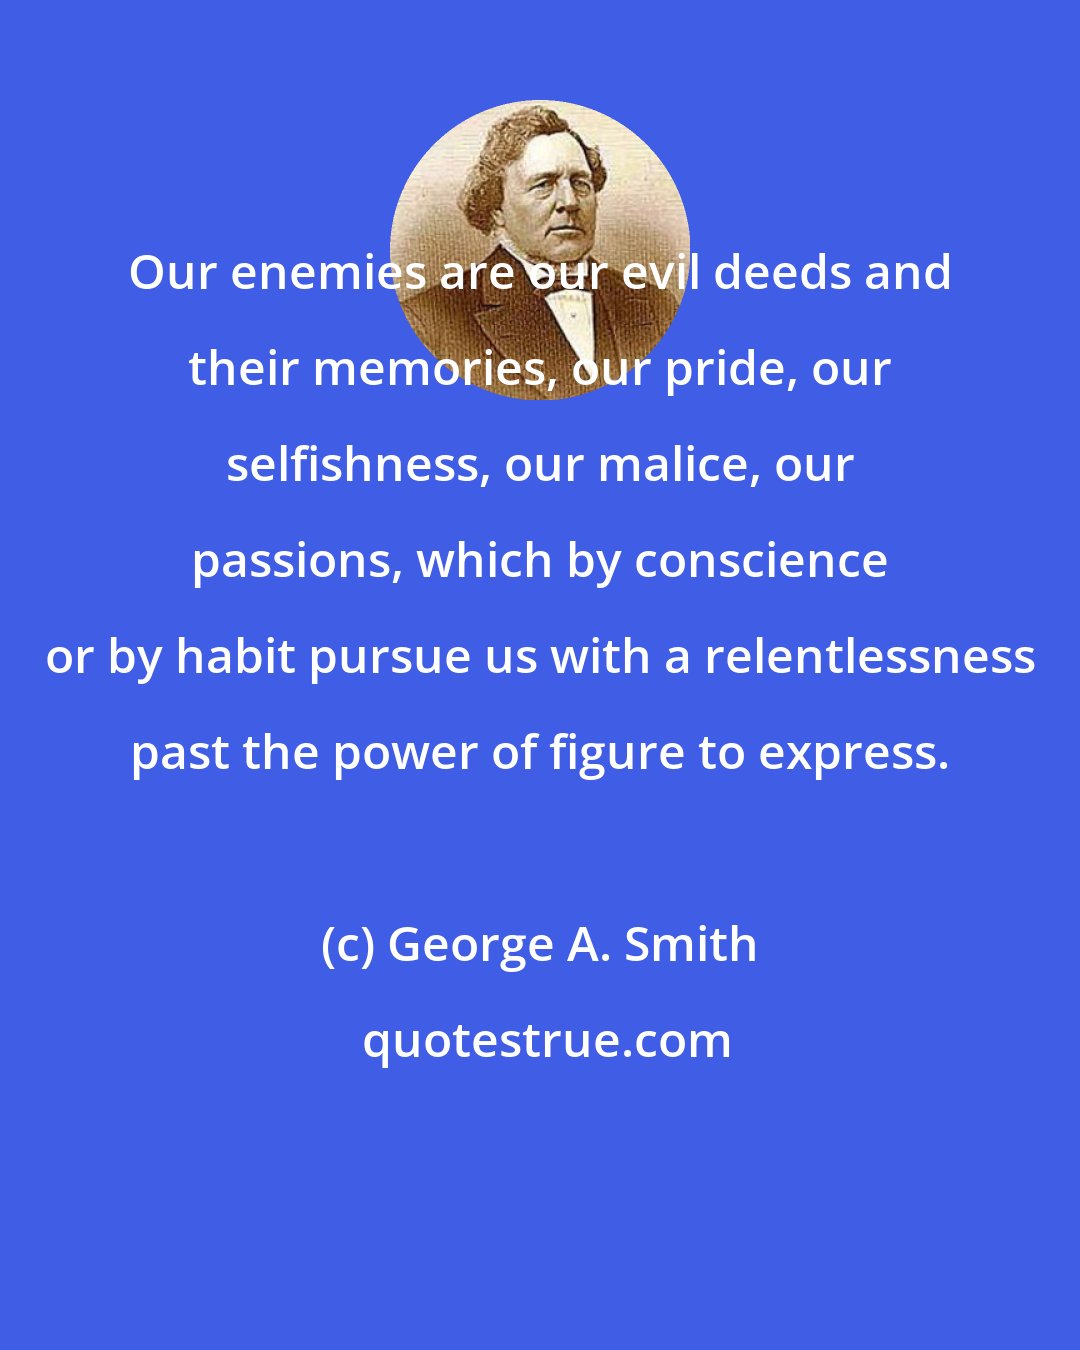 George A. Smith: Our enemies are our evil deeds and their memories, our pride, our selfishness, our malice, our passions, which by conscience or by habit pursue us with a relentlessness past the power of figure to express.